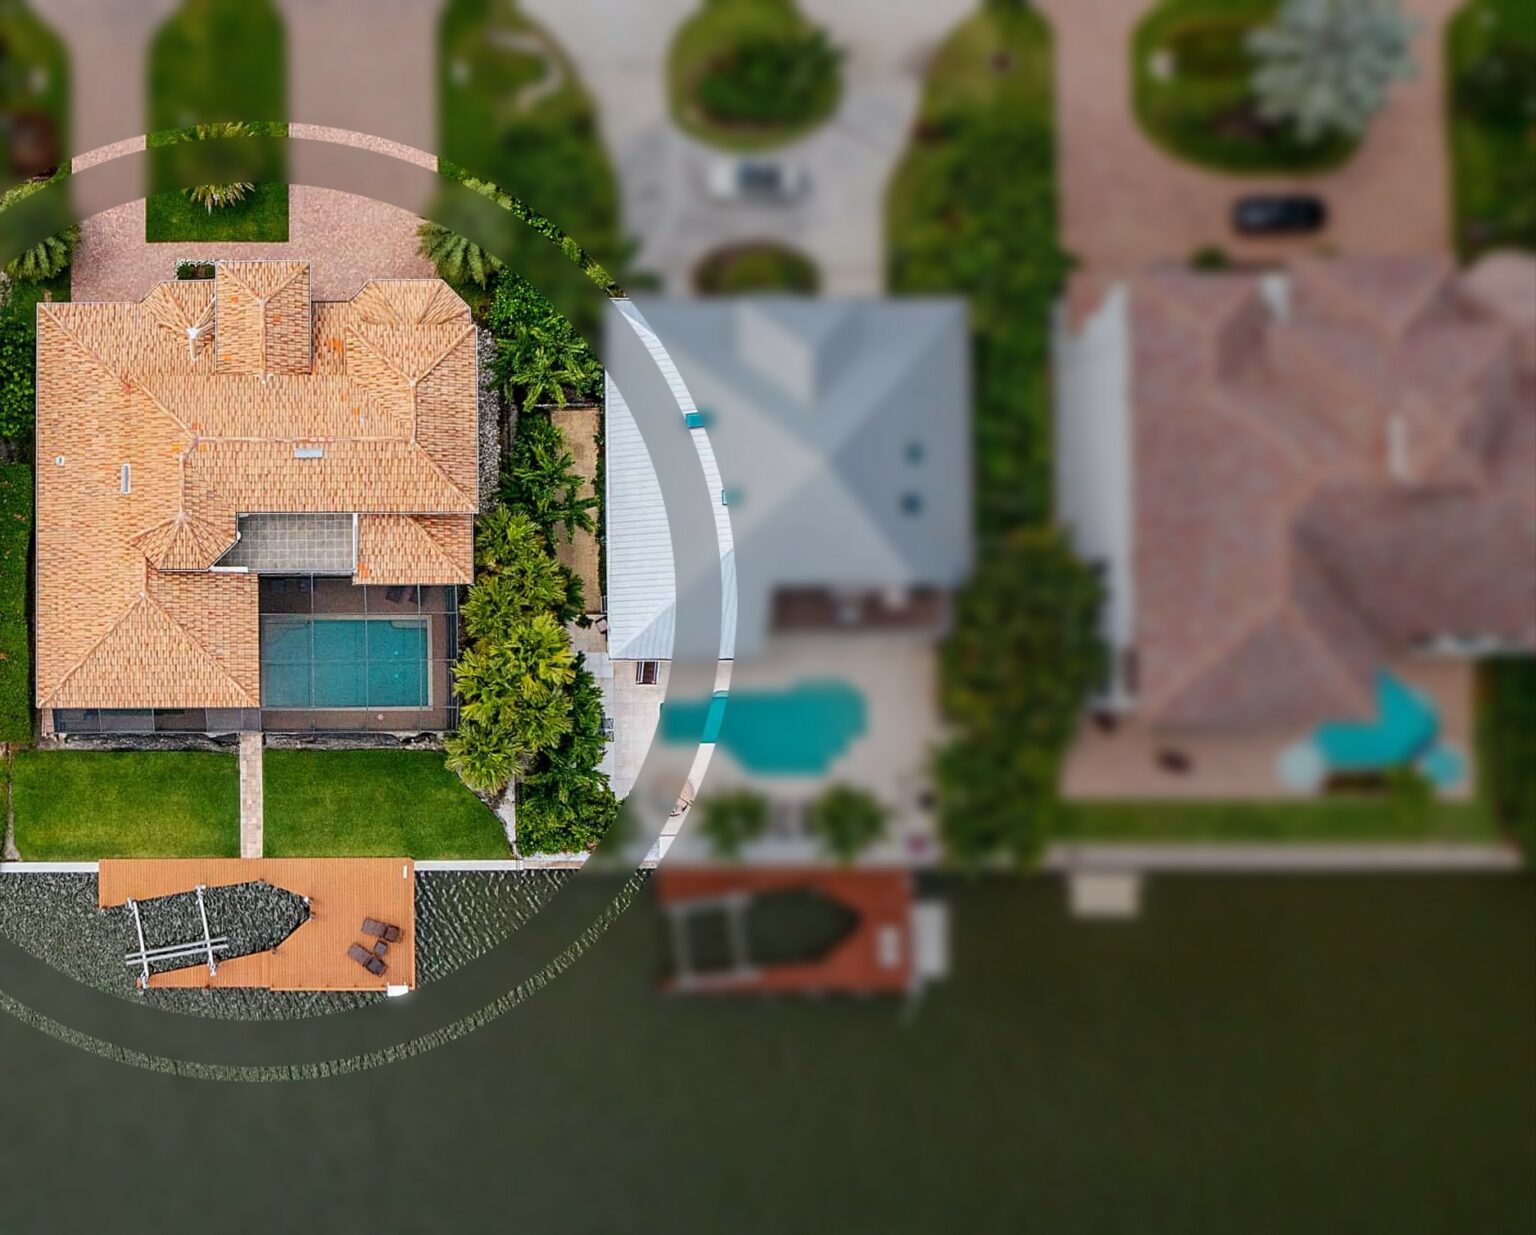 naples, fl vacation home Backyard from aerial shot. on canal with boat dock